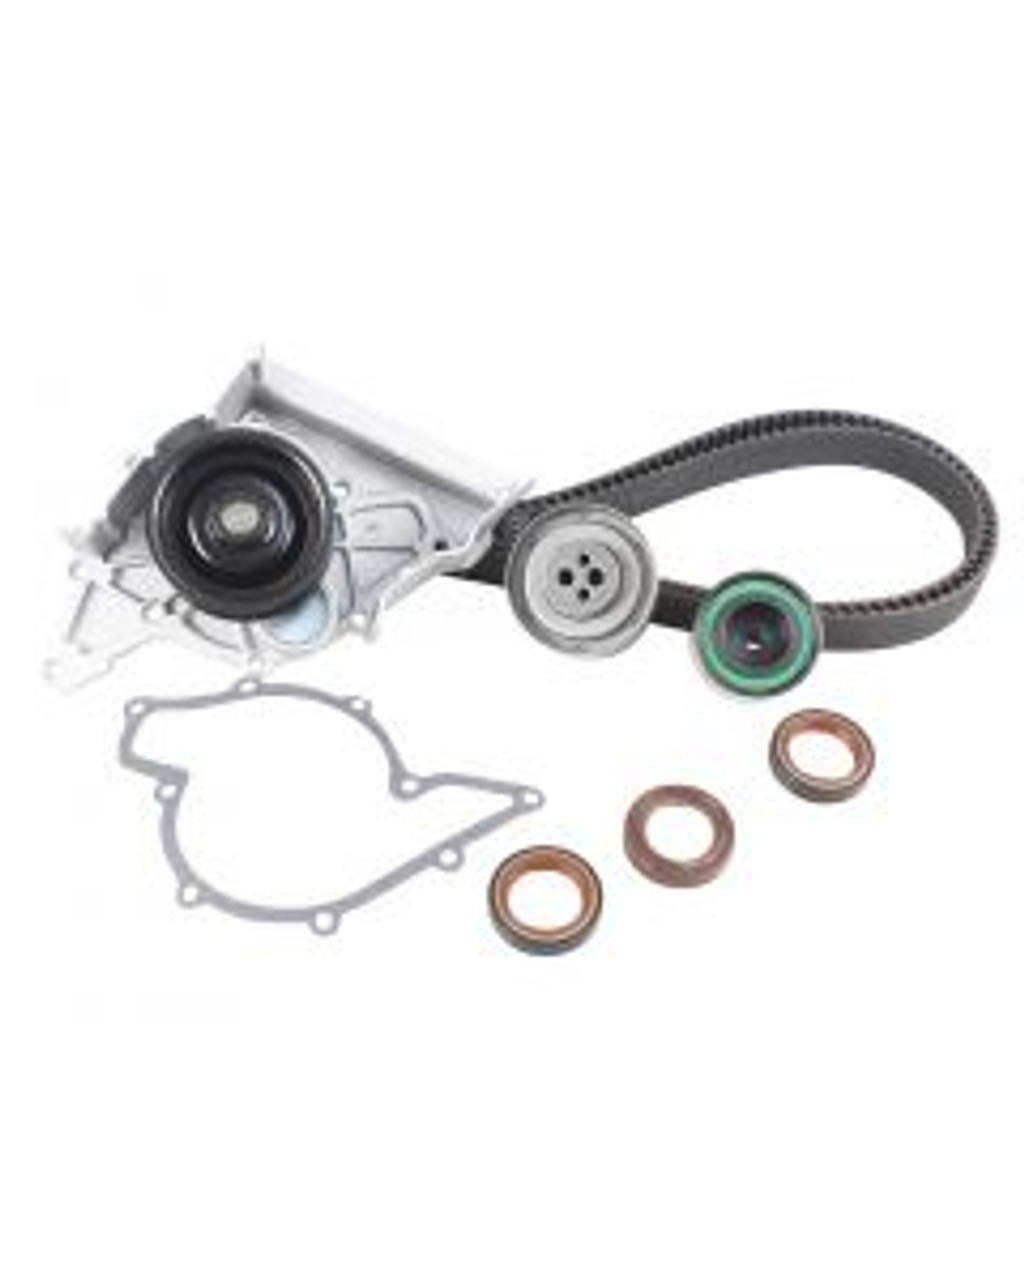 Timing Belt Kit with Water Pump 2.8L 1993 Audi 90 - TBK806WP.9